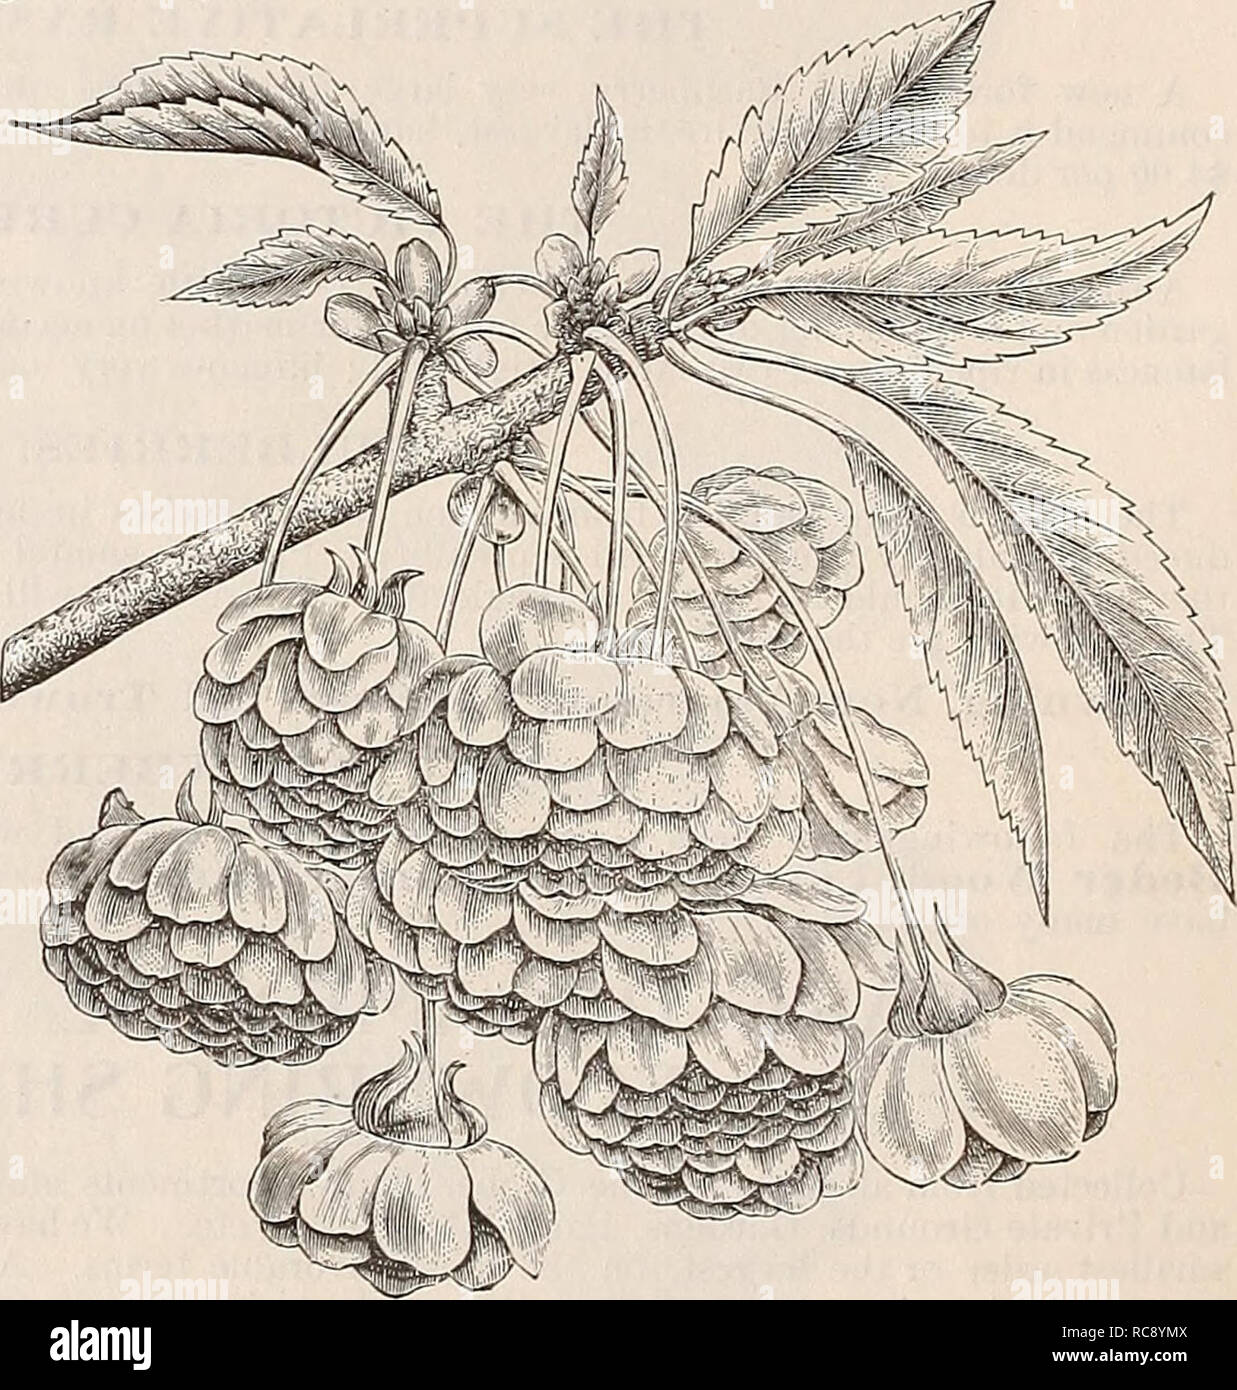 . [Ellwanger &amp; Barry's general catalogue]. LEAVES OF .JAP.N MAPLE —i NATURAL SIZE. habit, the foliage of the second growth is of a of the older foliage, produces a charming effect RED-FLOWERED HORSE CHESTNUT. One of the finest trees in cultivation ; form round, flowers showy red; blooms a little later than the white, and the leaves are of a deeper green. One of the most valuable ornamental trees. $1.00. CUT-LEAVED WEEPING BIRCH. Beyond question one of the most popular of all weeping or pendulous trees. Its tall, slender, yet vigorous growth, graceful drooping branches, silvery-white bark, Stock Photo